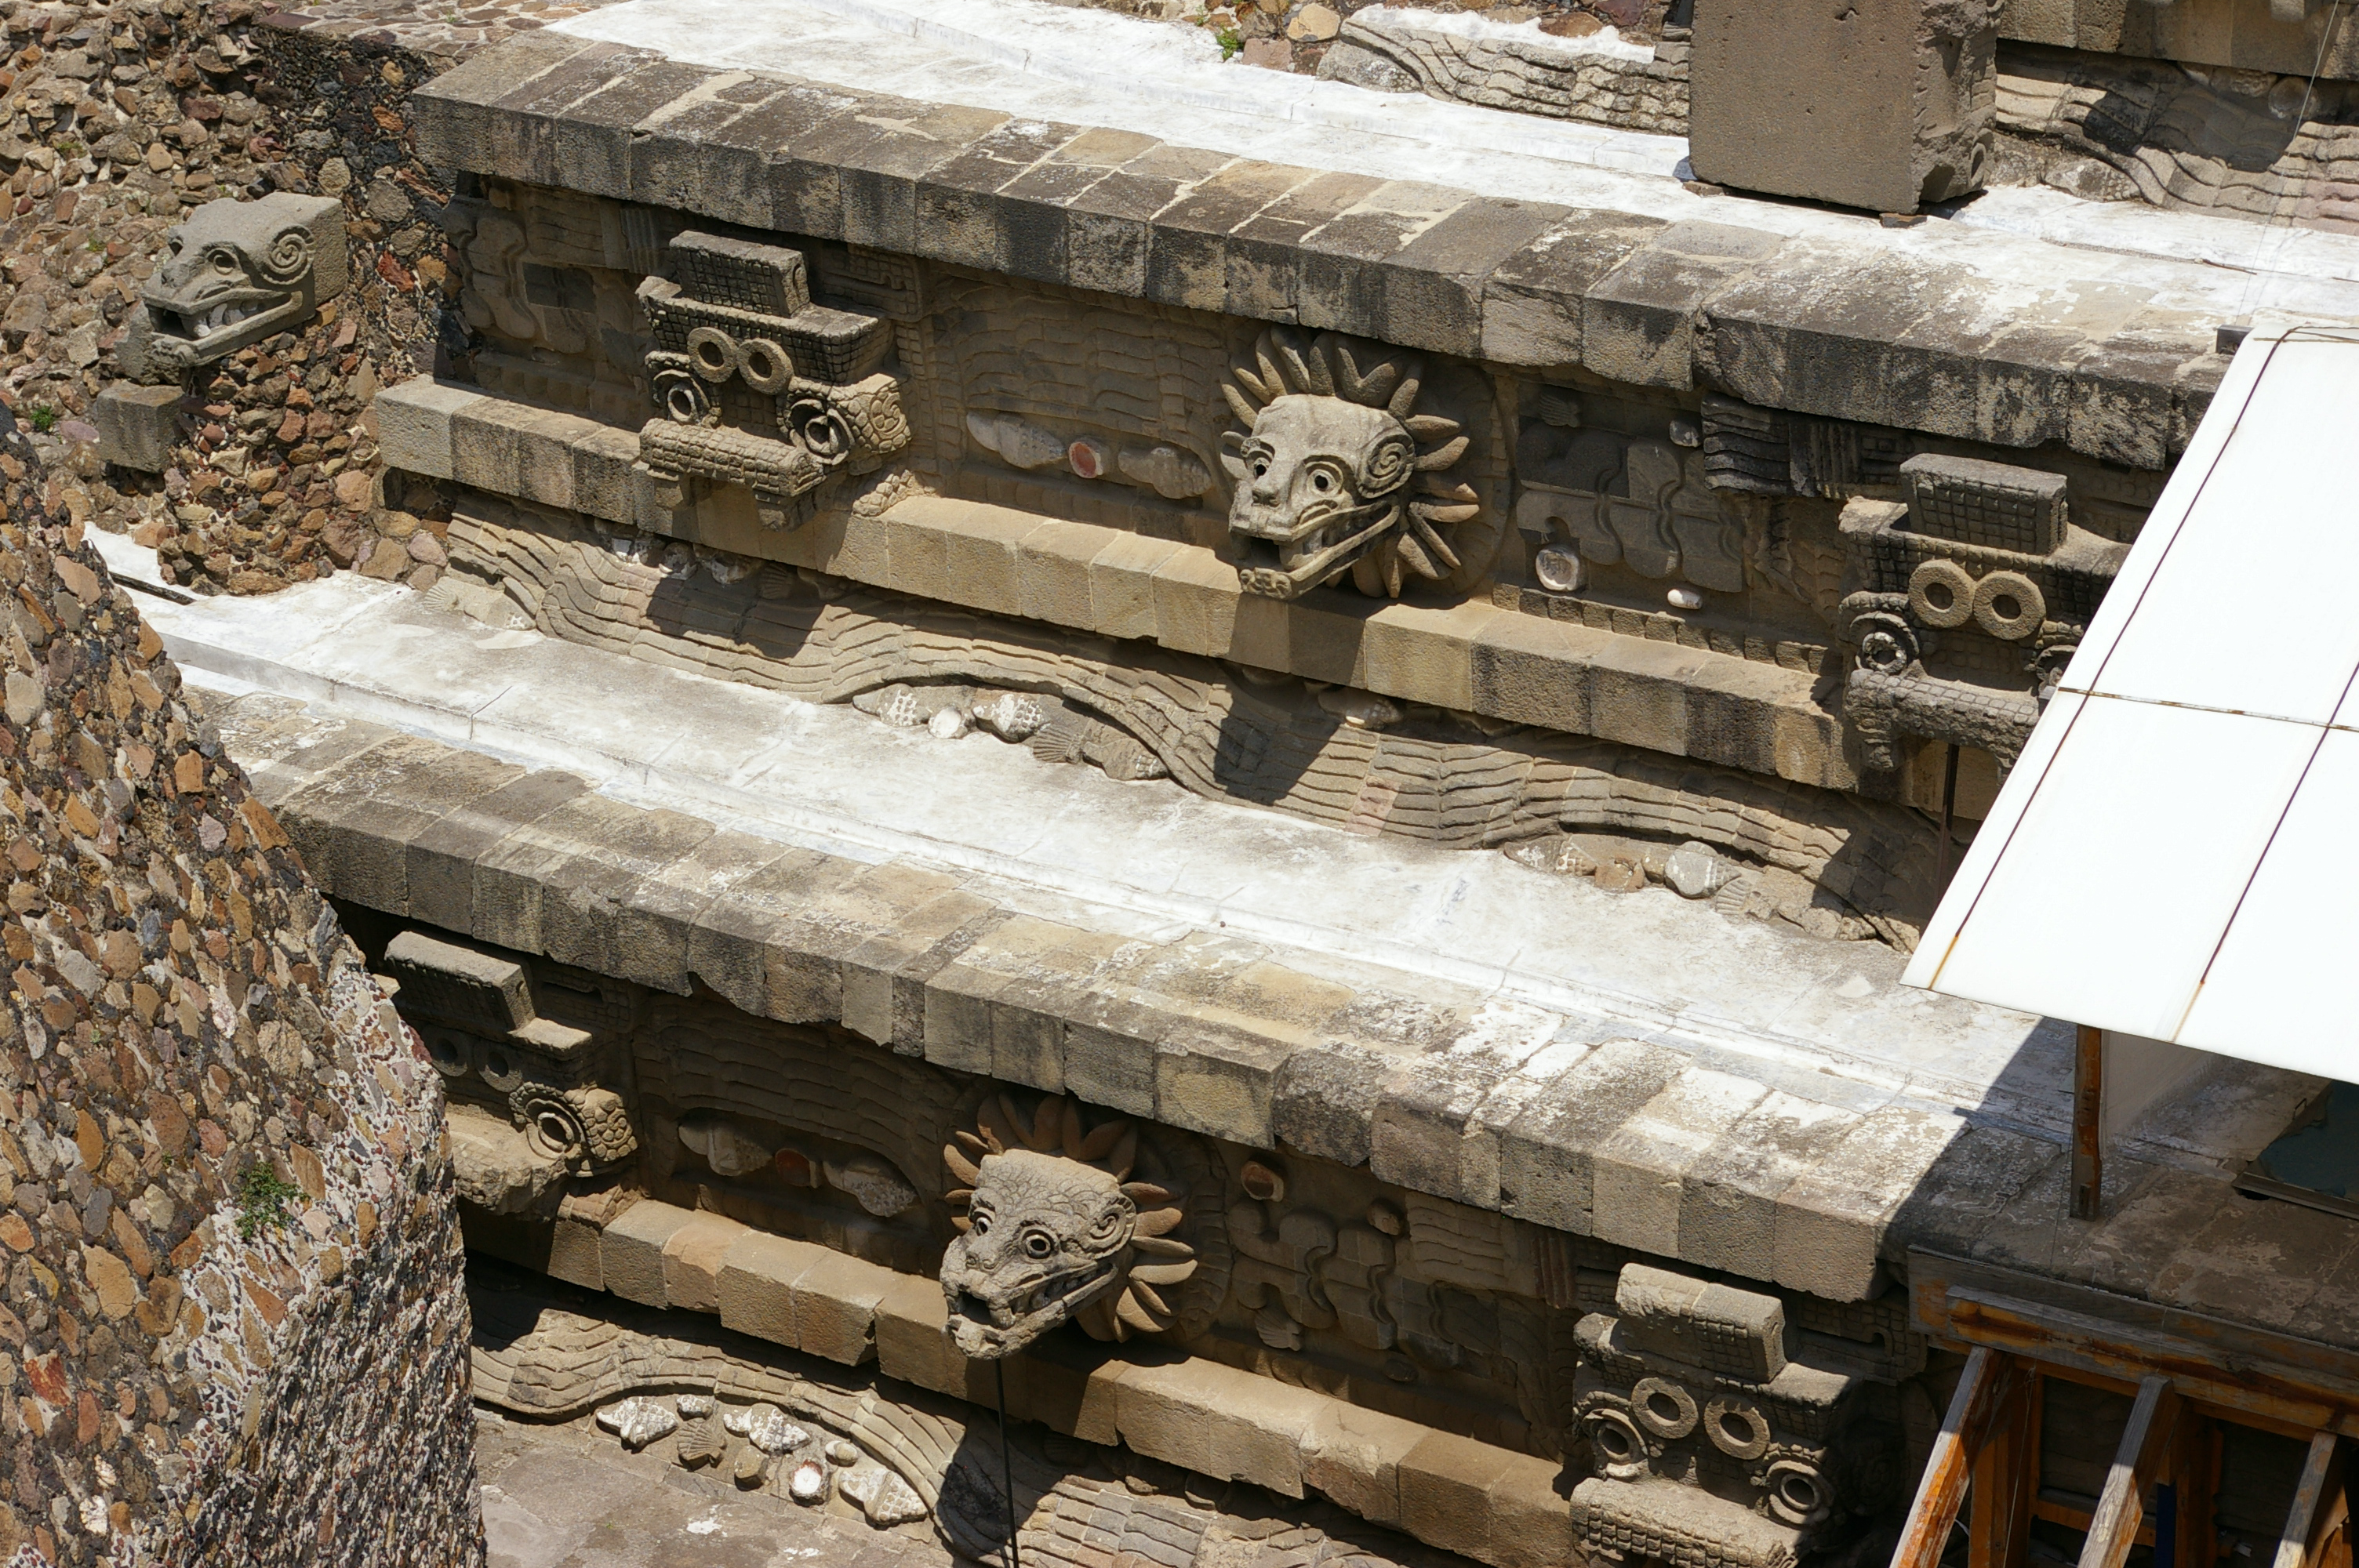 Temple of the Feathered Serpent, ca. second-third century (Teotihuacan, Mexico). Photo by jschmeling, CC BY 2.0.